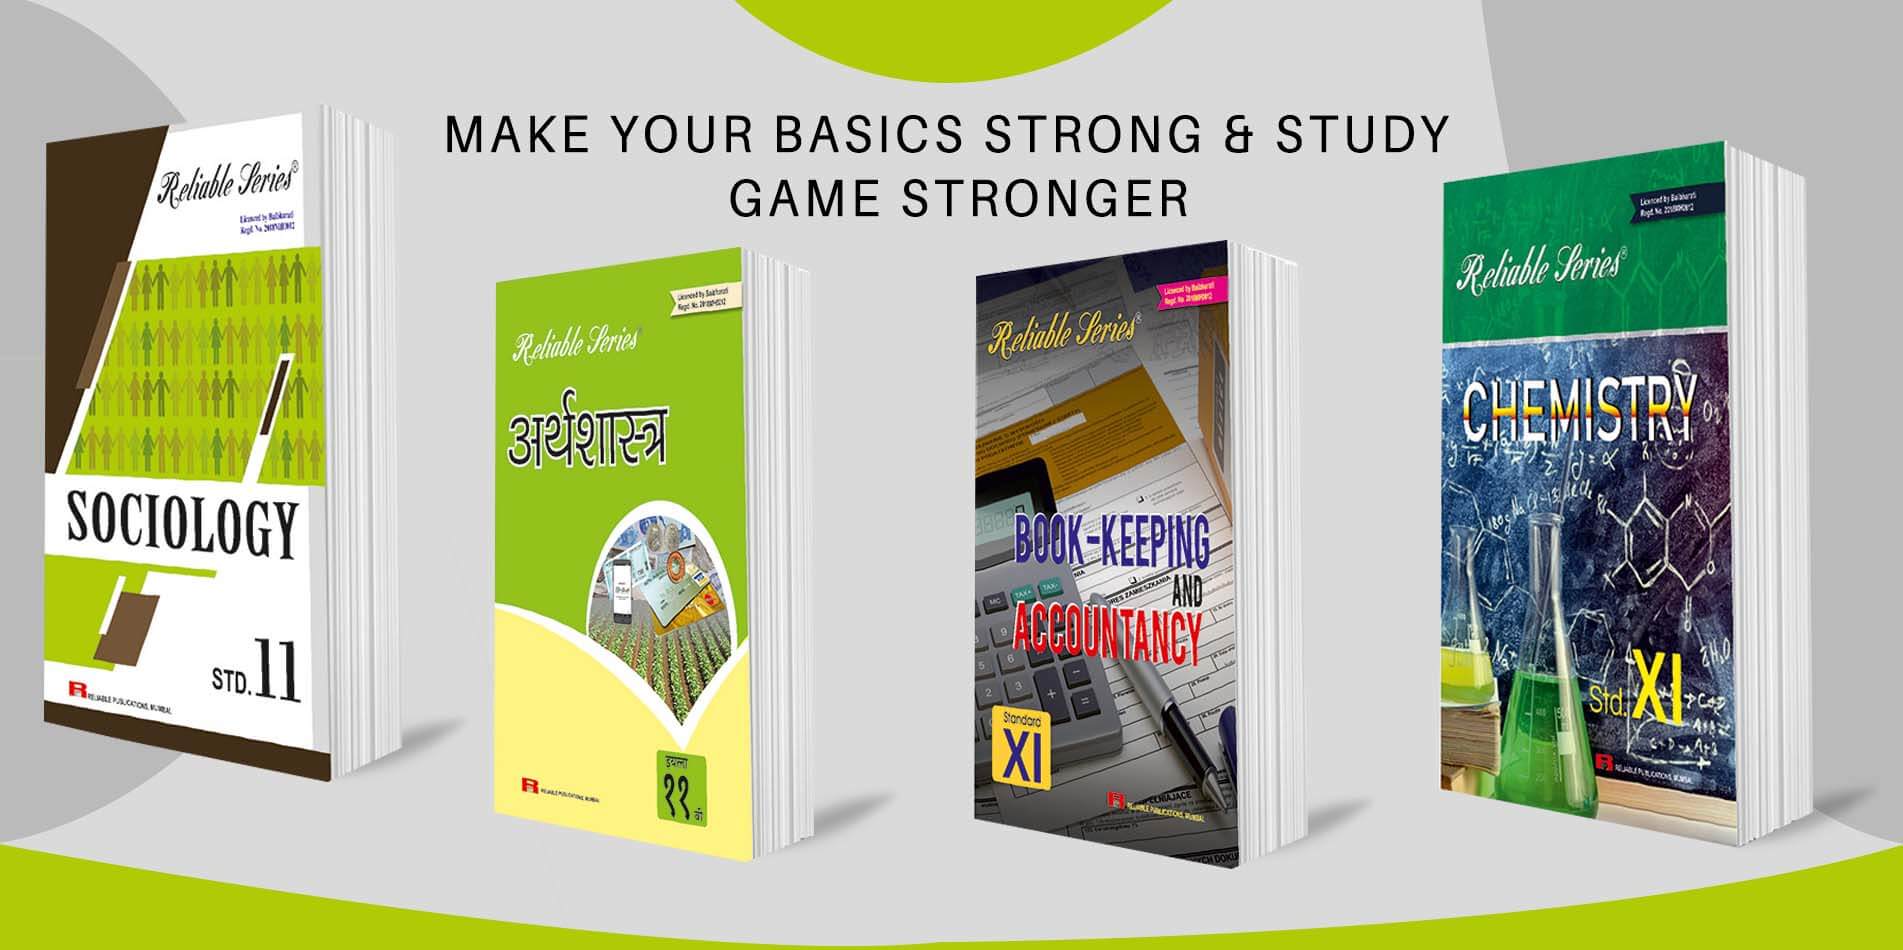 Reliable Publications | Maharashtra State Board Reliable Series Books, eBooks and Guides